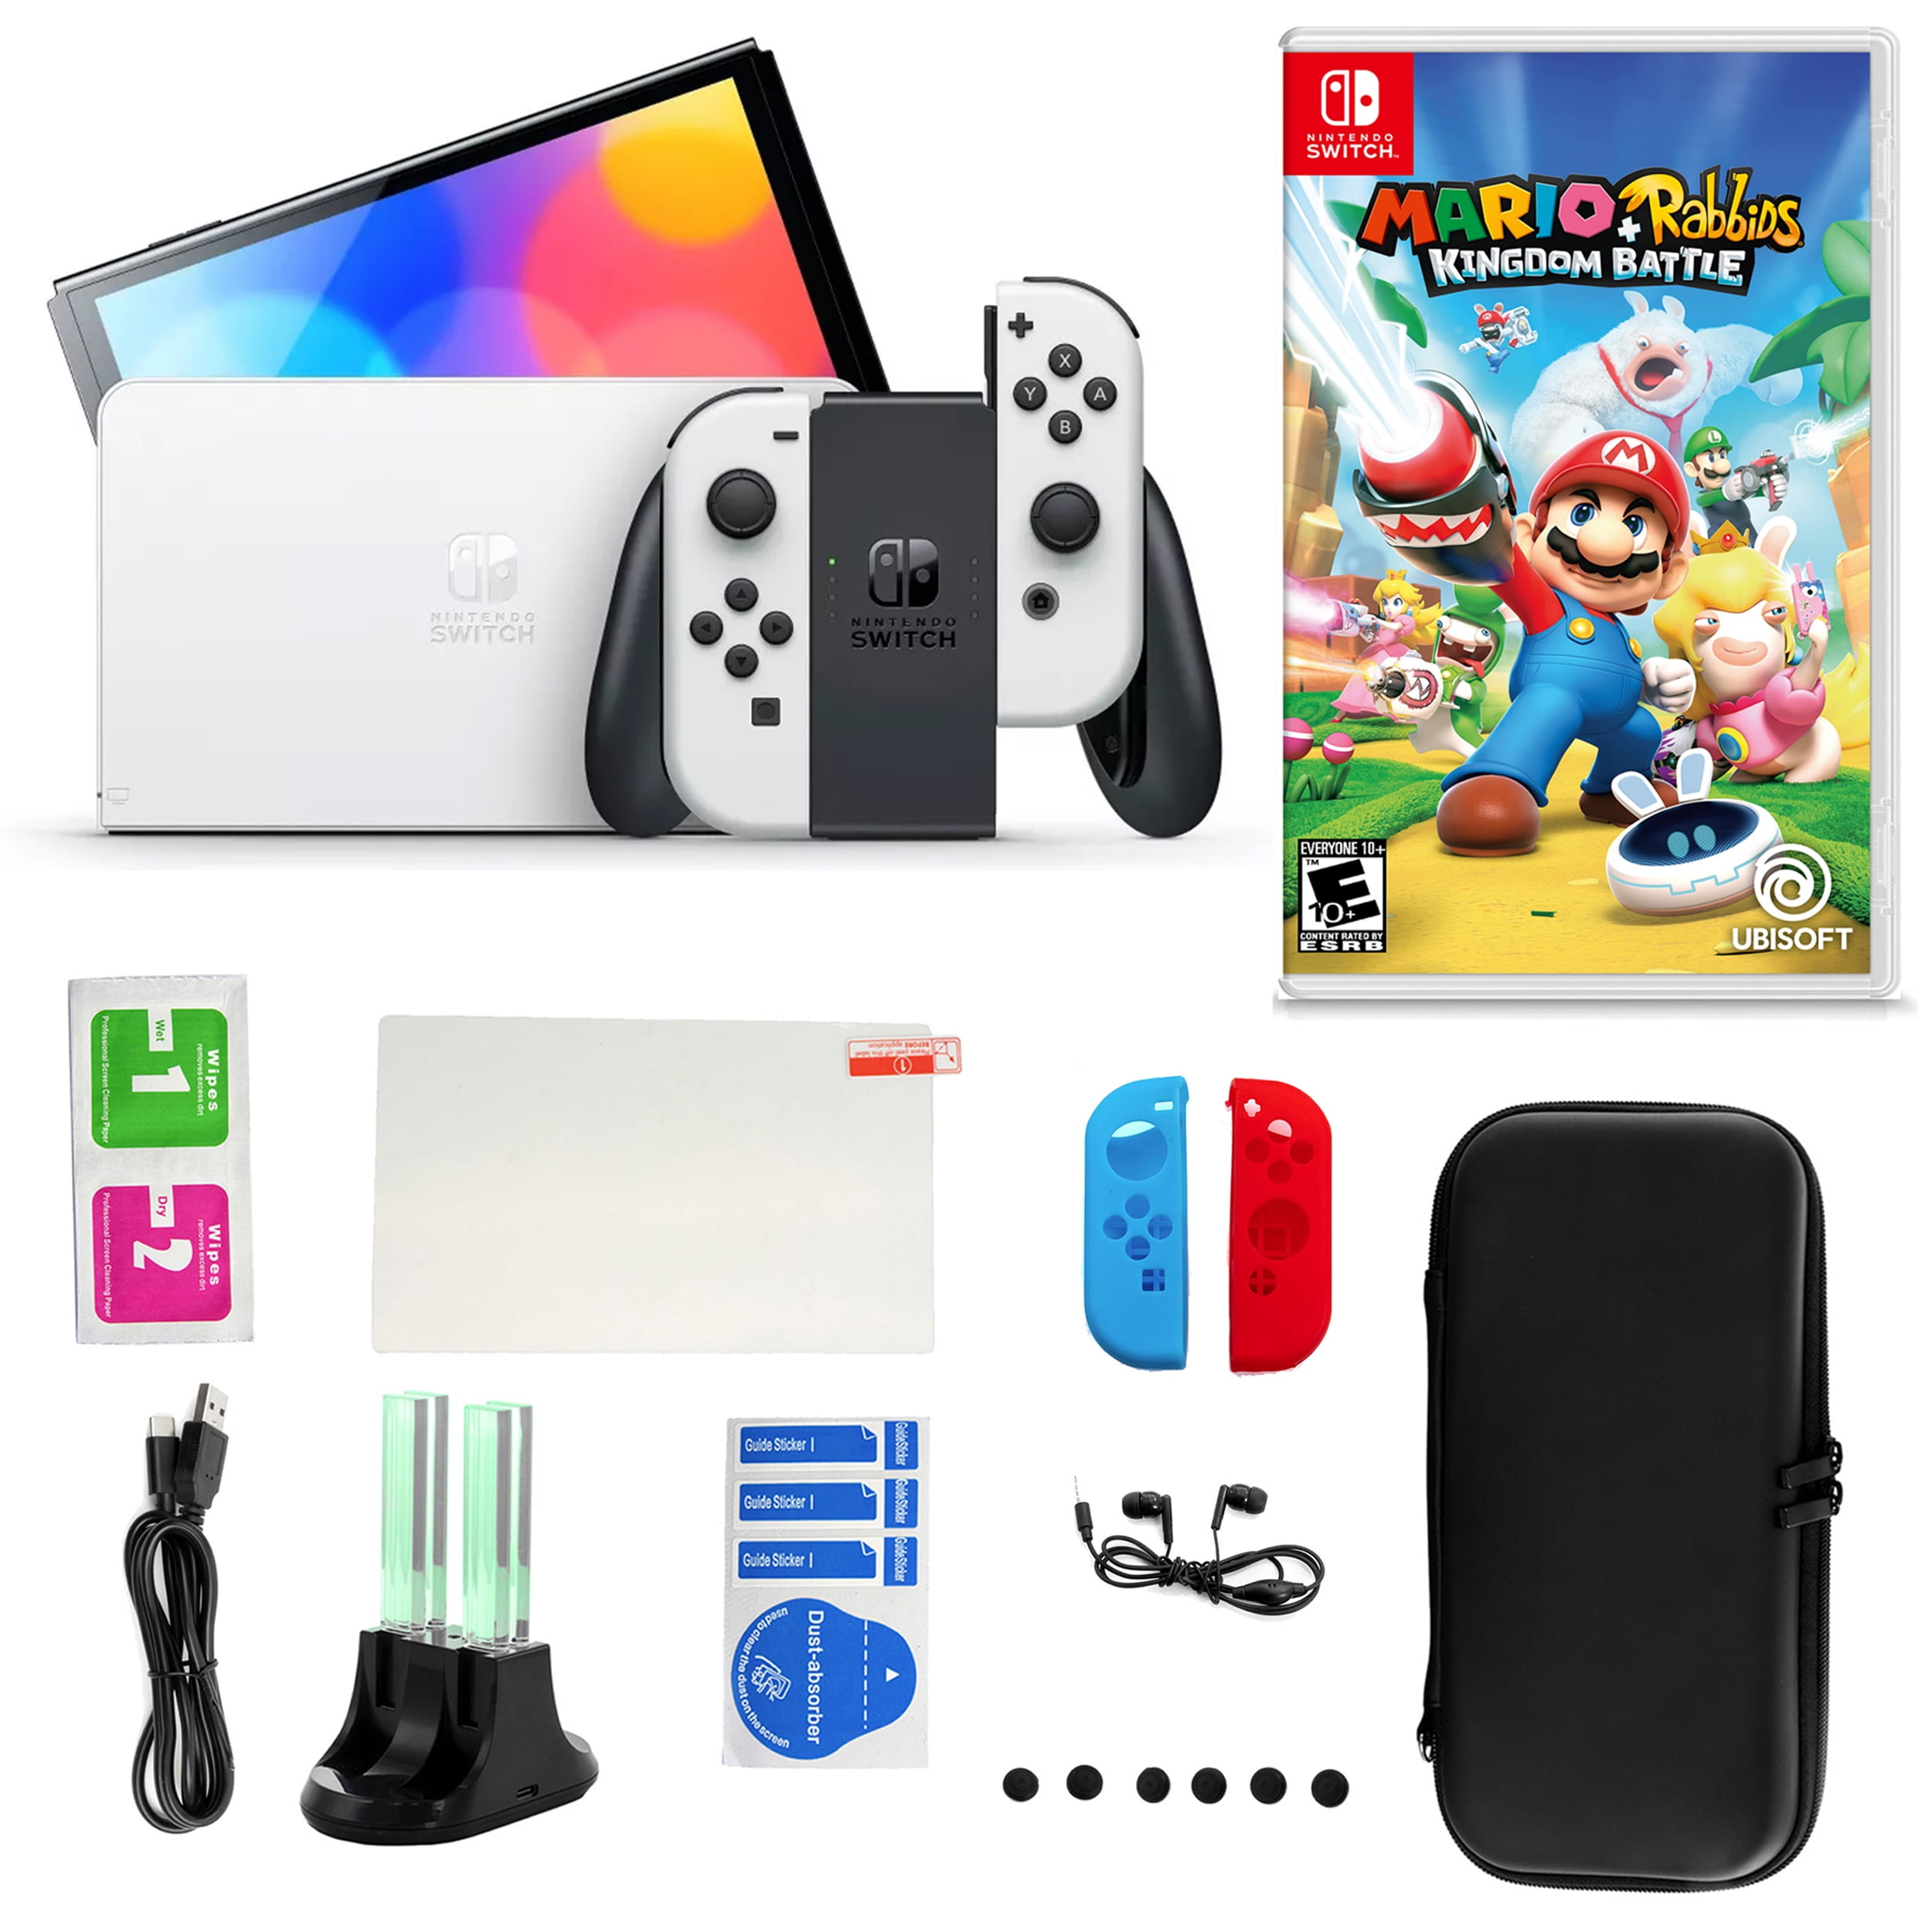 Nintendo Switch OLED White with Super Smash Bros Ultimate Game